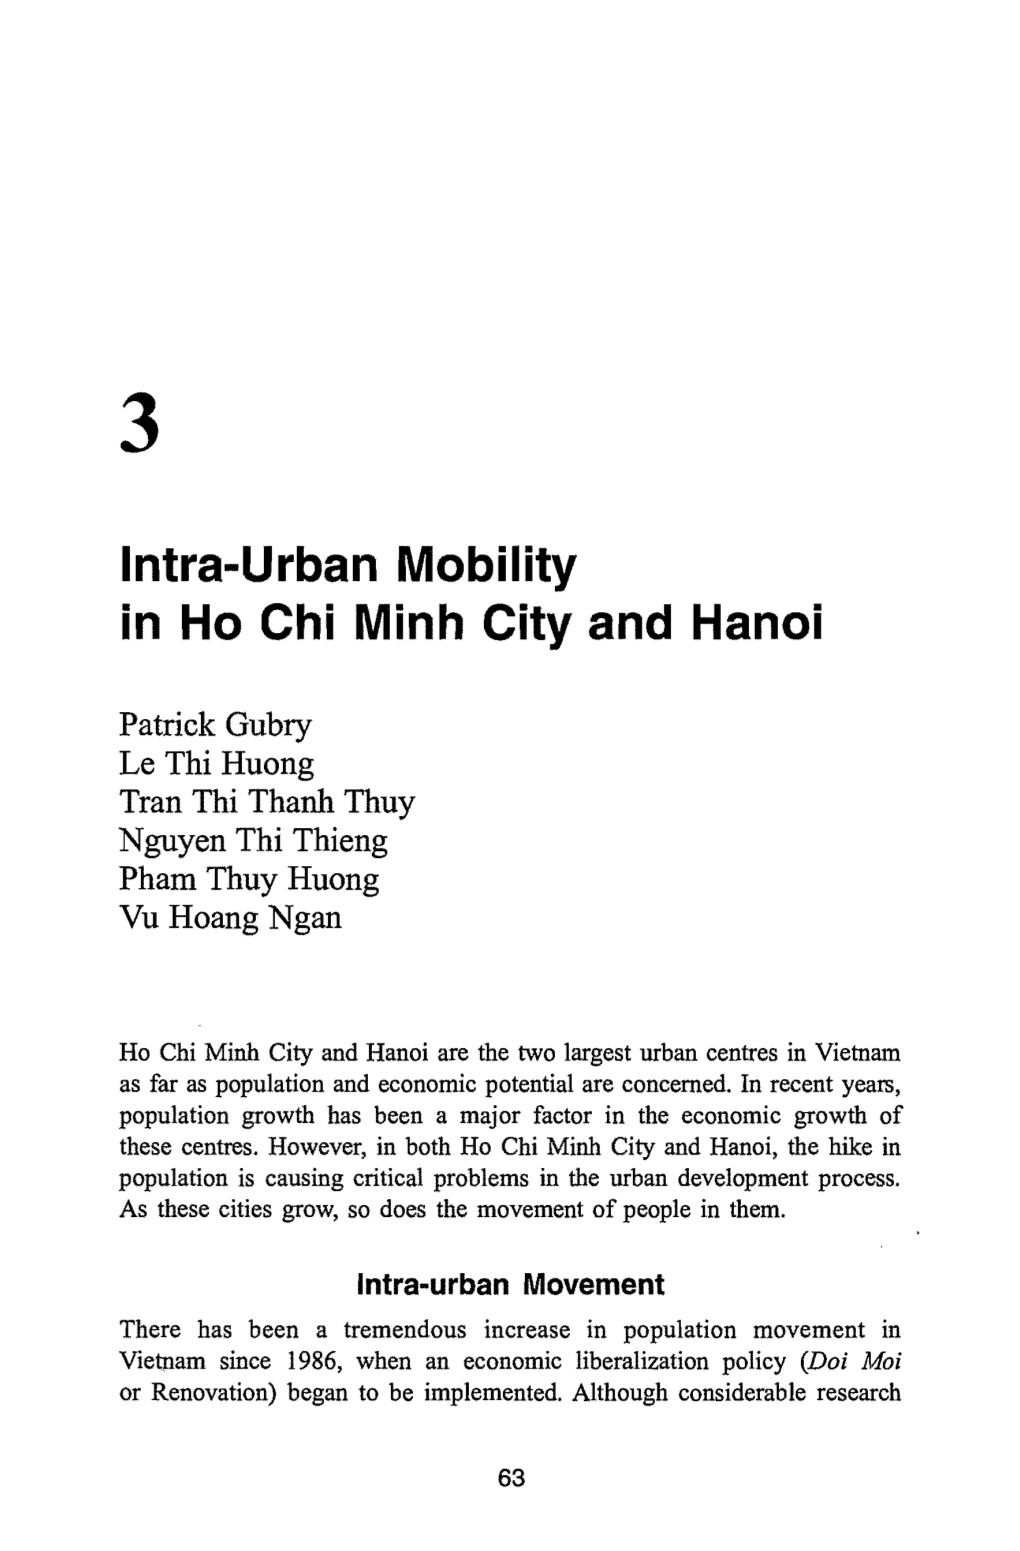 Intra-Urban Mobility in Ho Chi Minh City and Hanoi